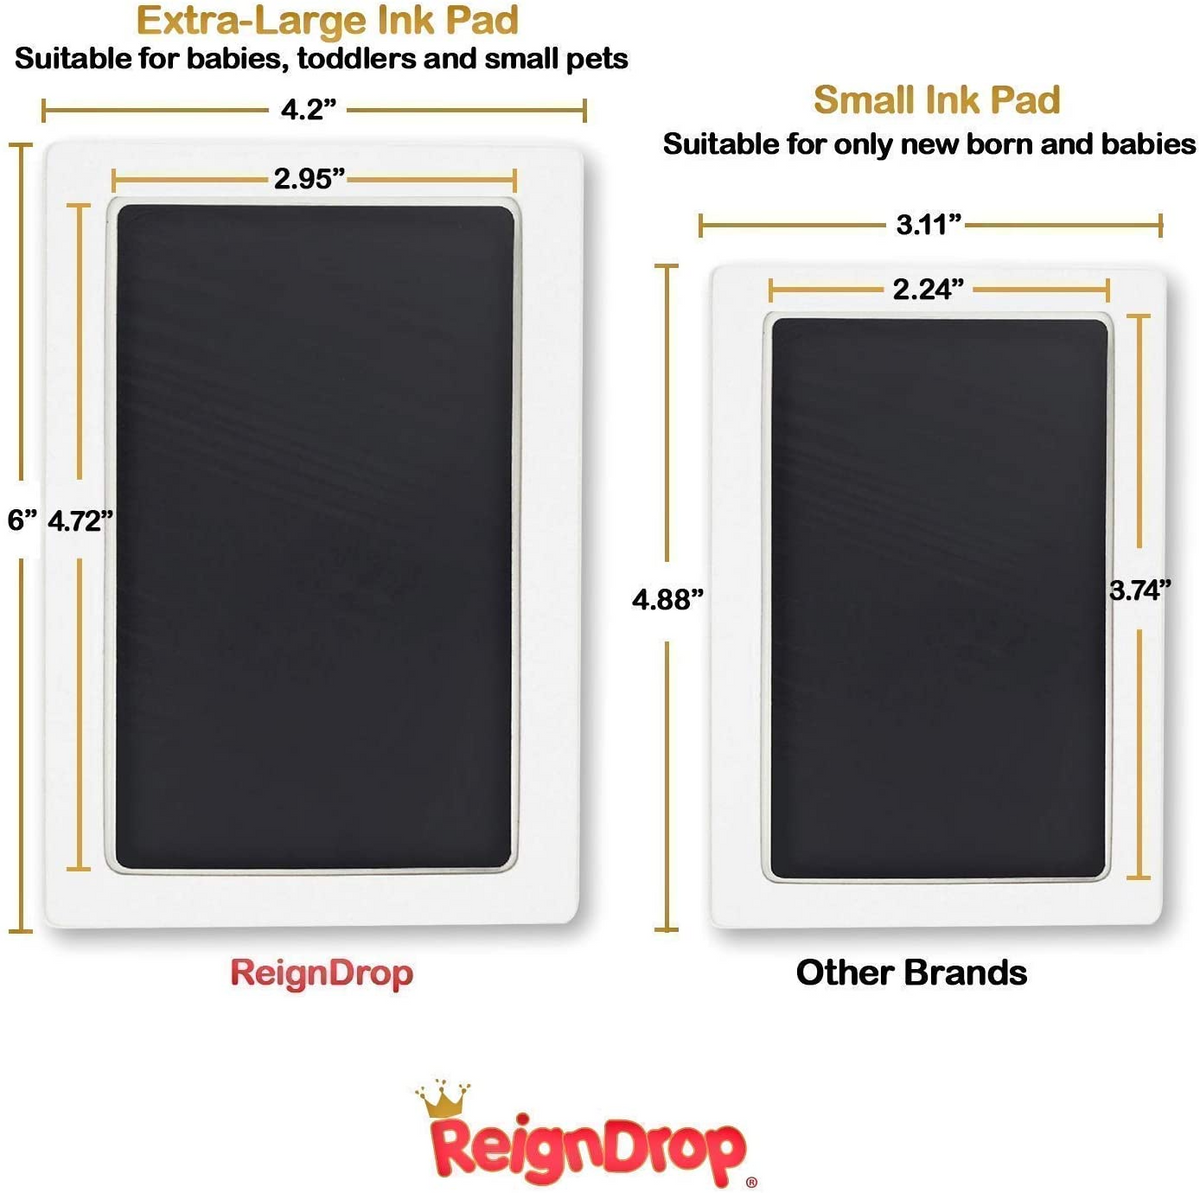 Clean Touch Ink Pad (Black) – ReignDrop